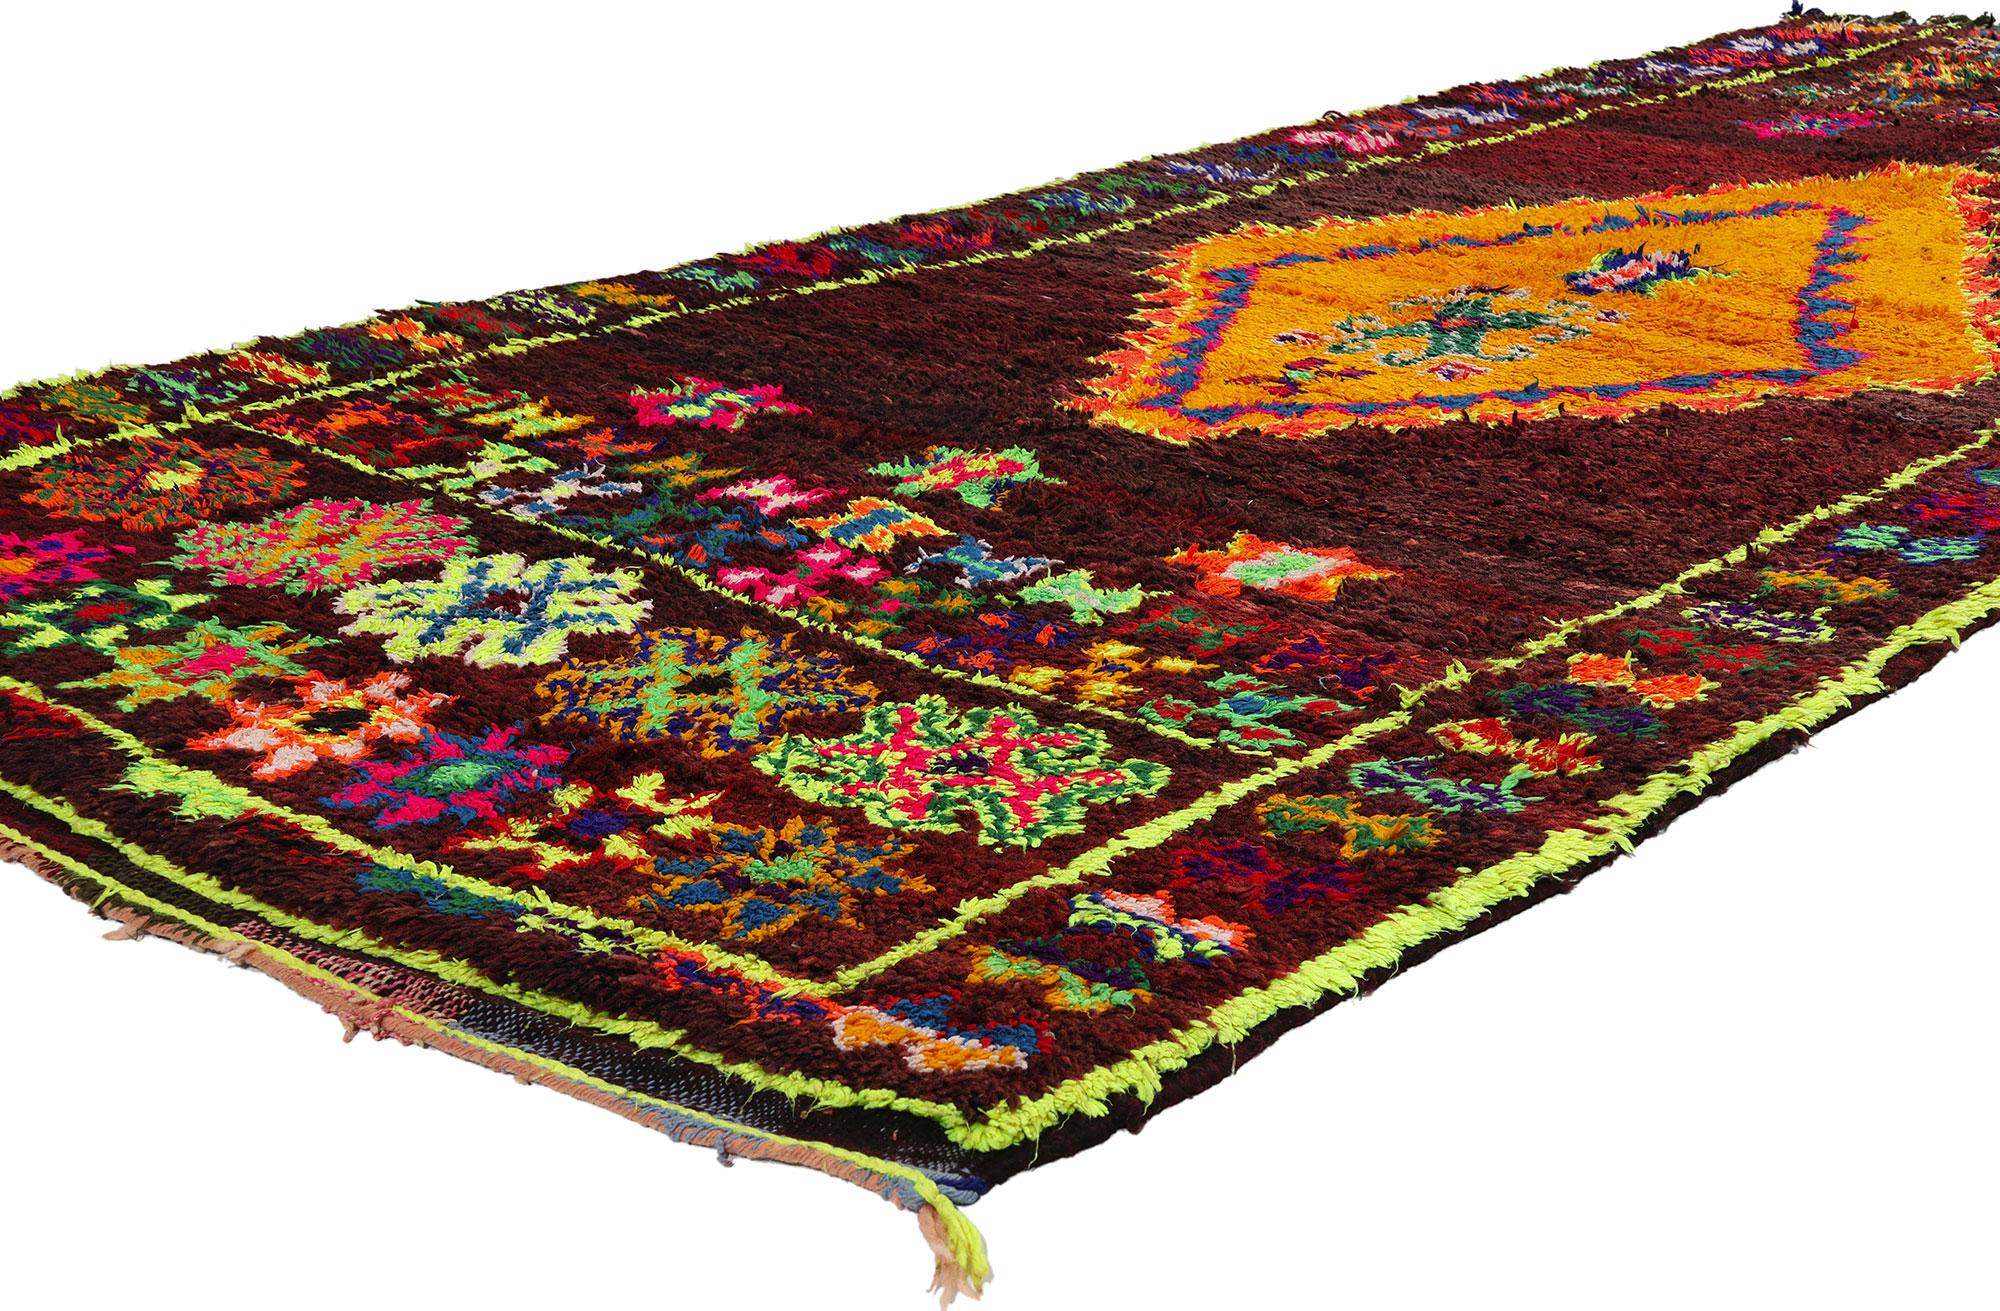 21804 Colorful Vintage Beni MGuild Moroccan Rug, 04'09 x 10'09. Nestled within the enchanting embrace of Morocco's Atlas Mountains, the skilled hands of Berber women from the Ait M'Guild tribe weave captivating tales through the intricate artistry